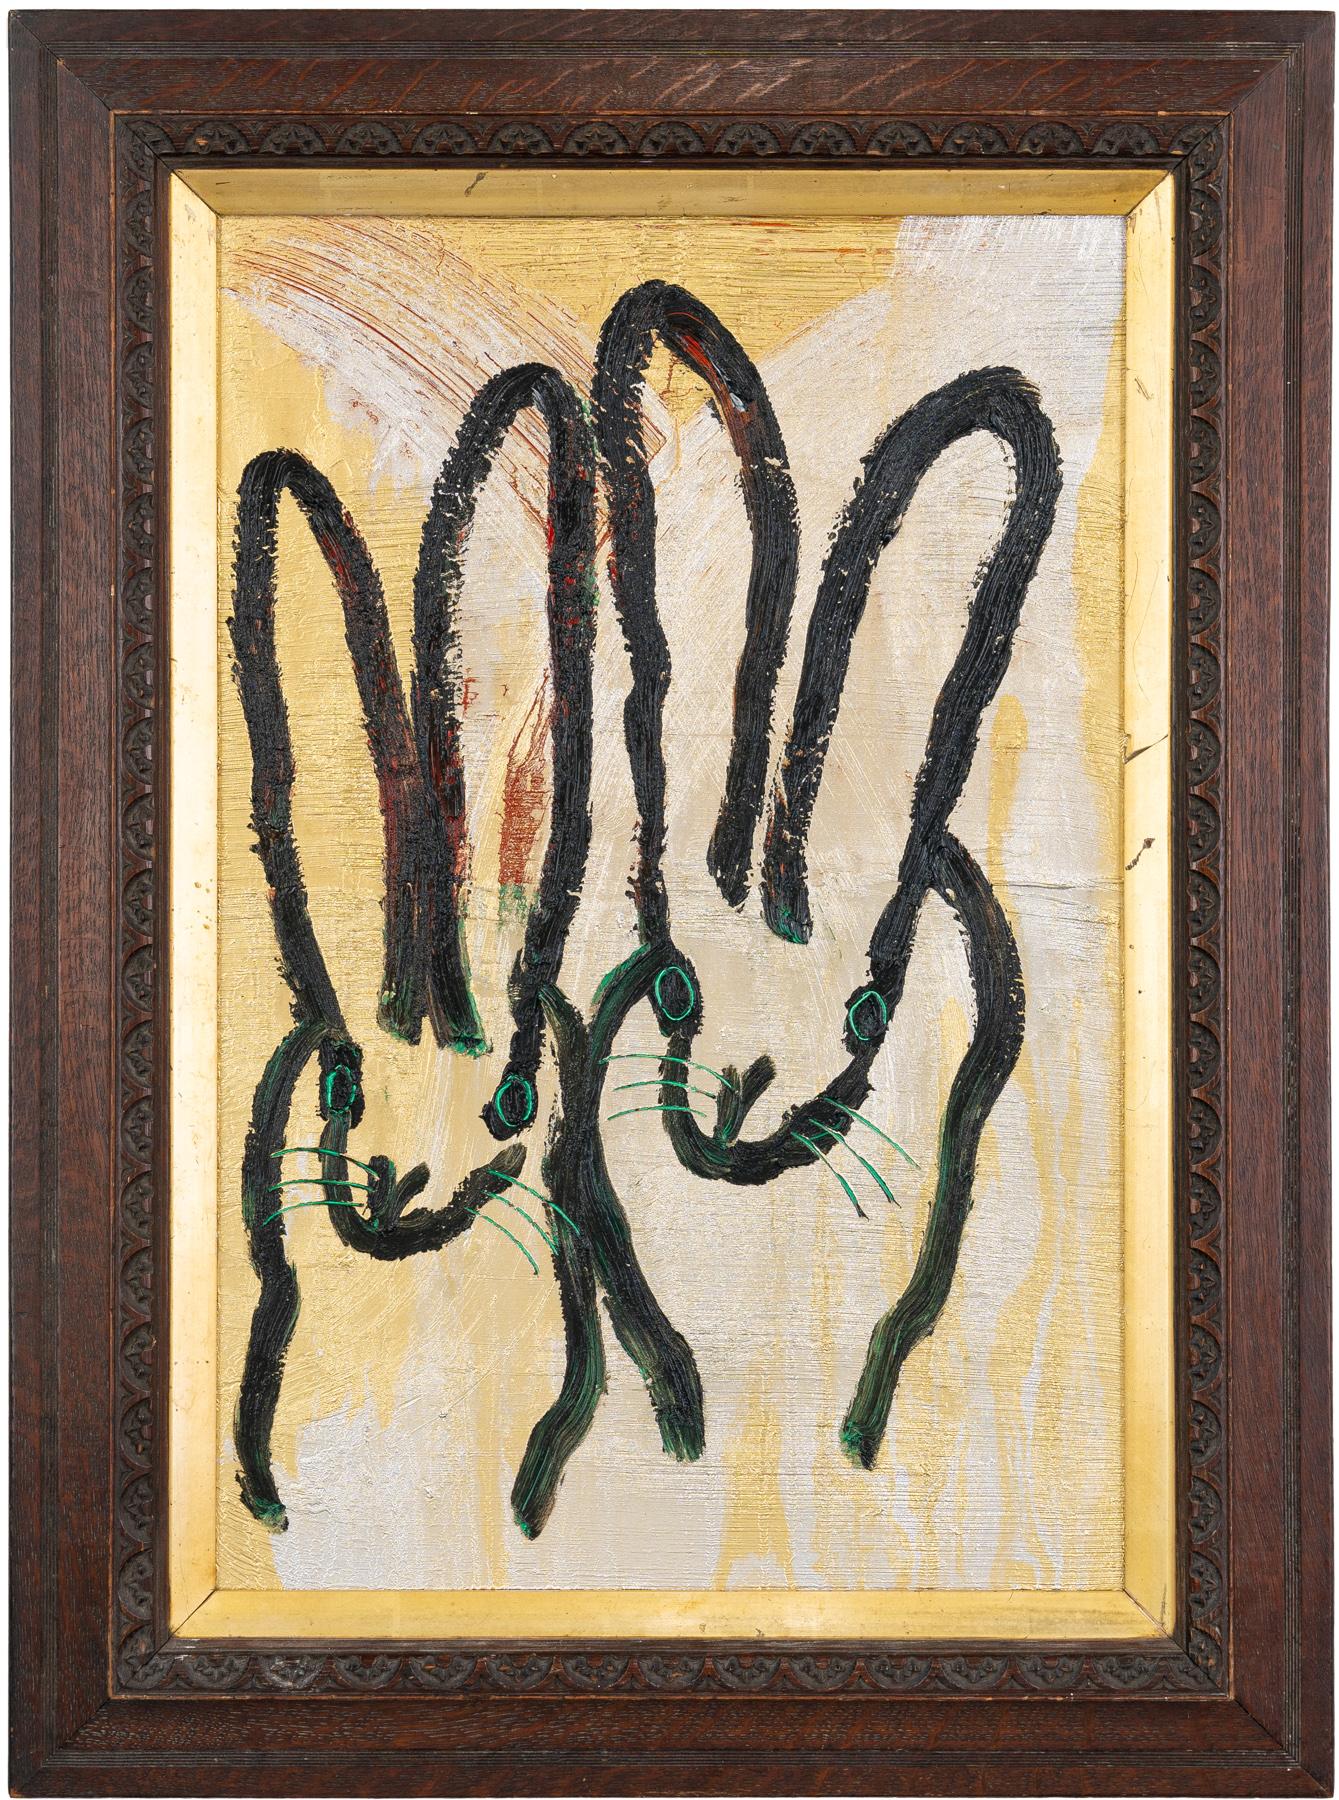 Hunt Slonem "Green Eyes" Bunnies on Metallic
Black outlined bunnies with over a gold and silver metallic background with green etched-in details. Framed in an antique wooden frame.

Unframed: 24 x 16 inches
Framed: 30.5 x 22.5 inches
*Painting is